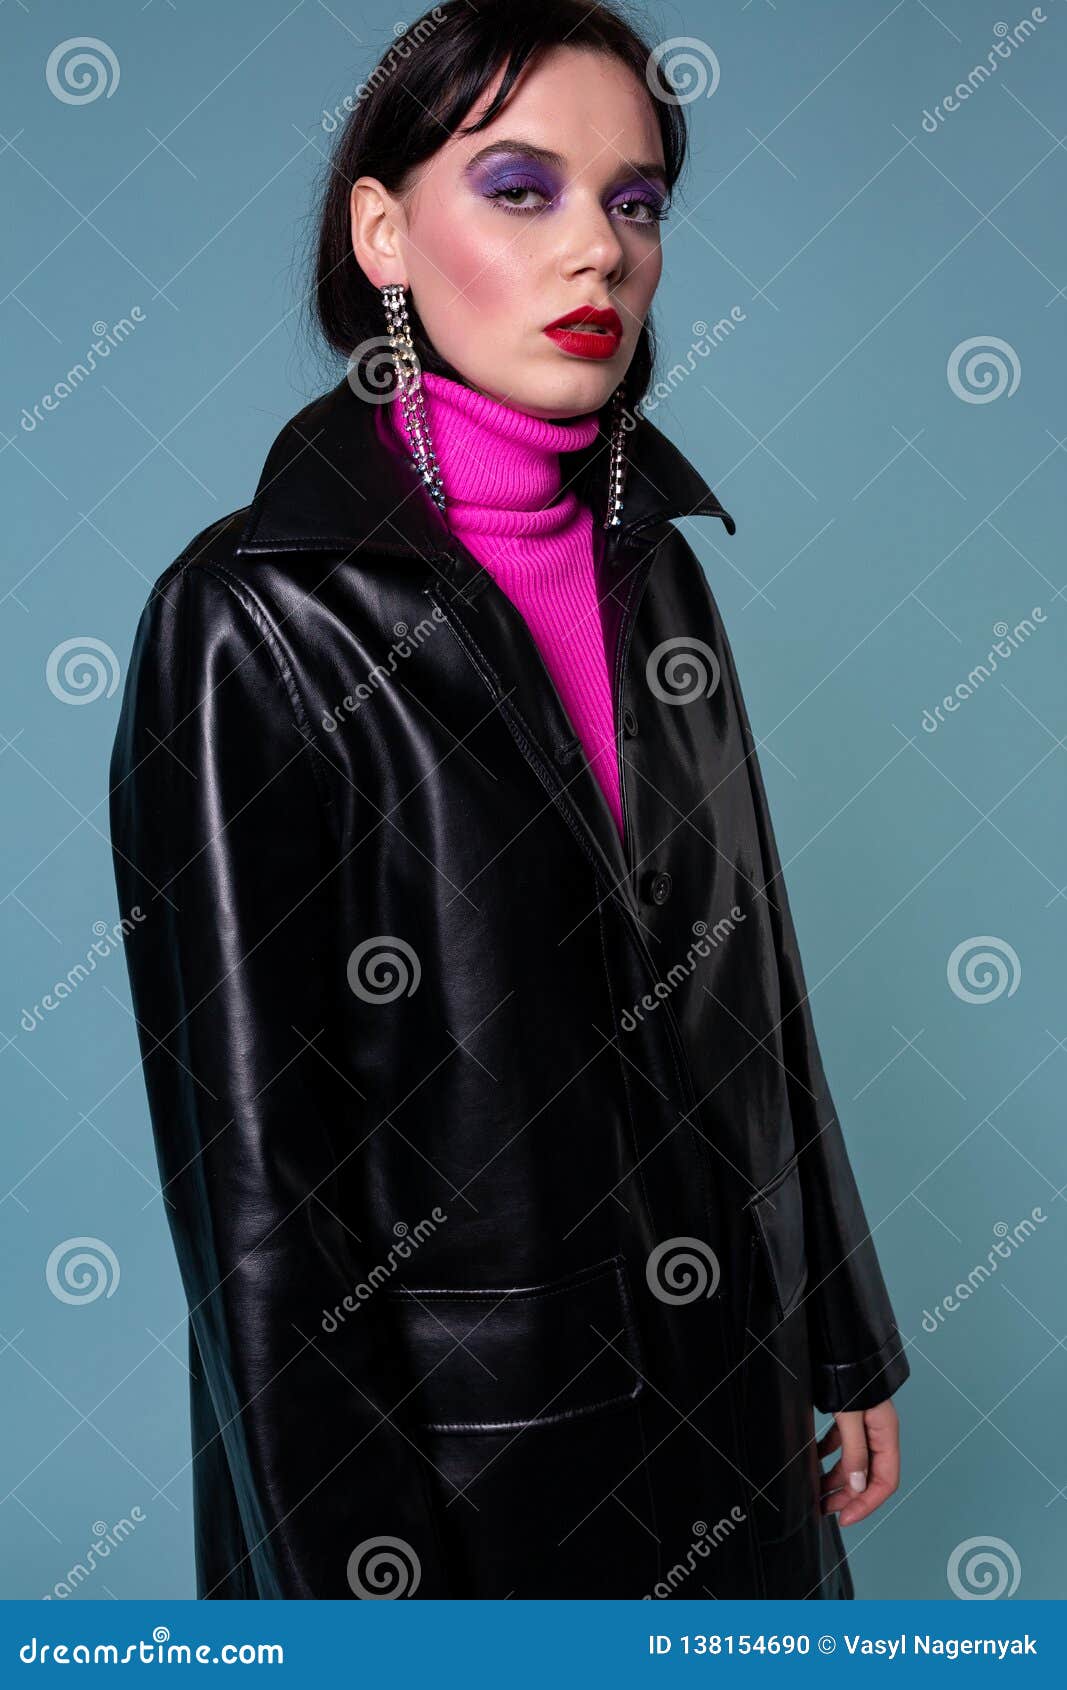 Beautiful Fashionable Short Hair Woman in Leather Clothing Stock Photo ...